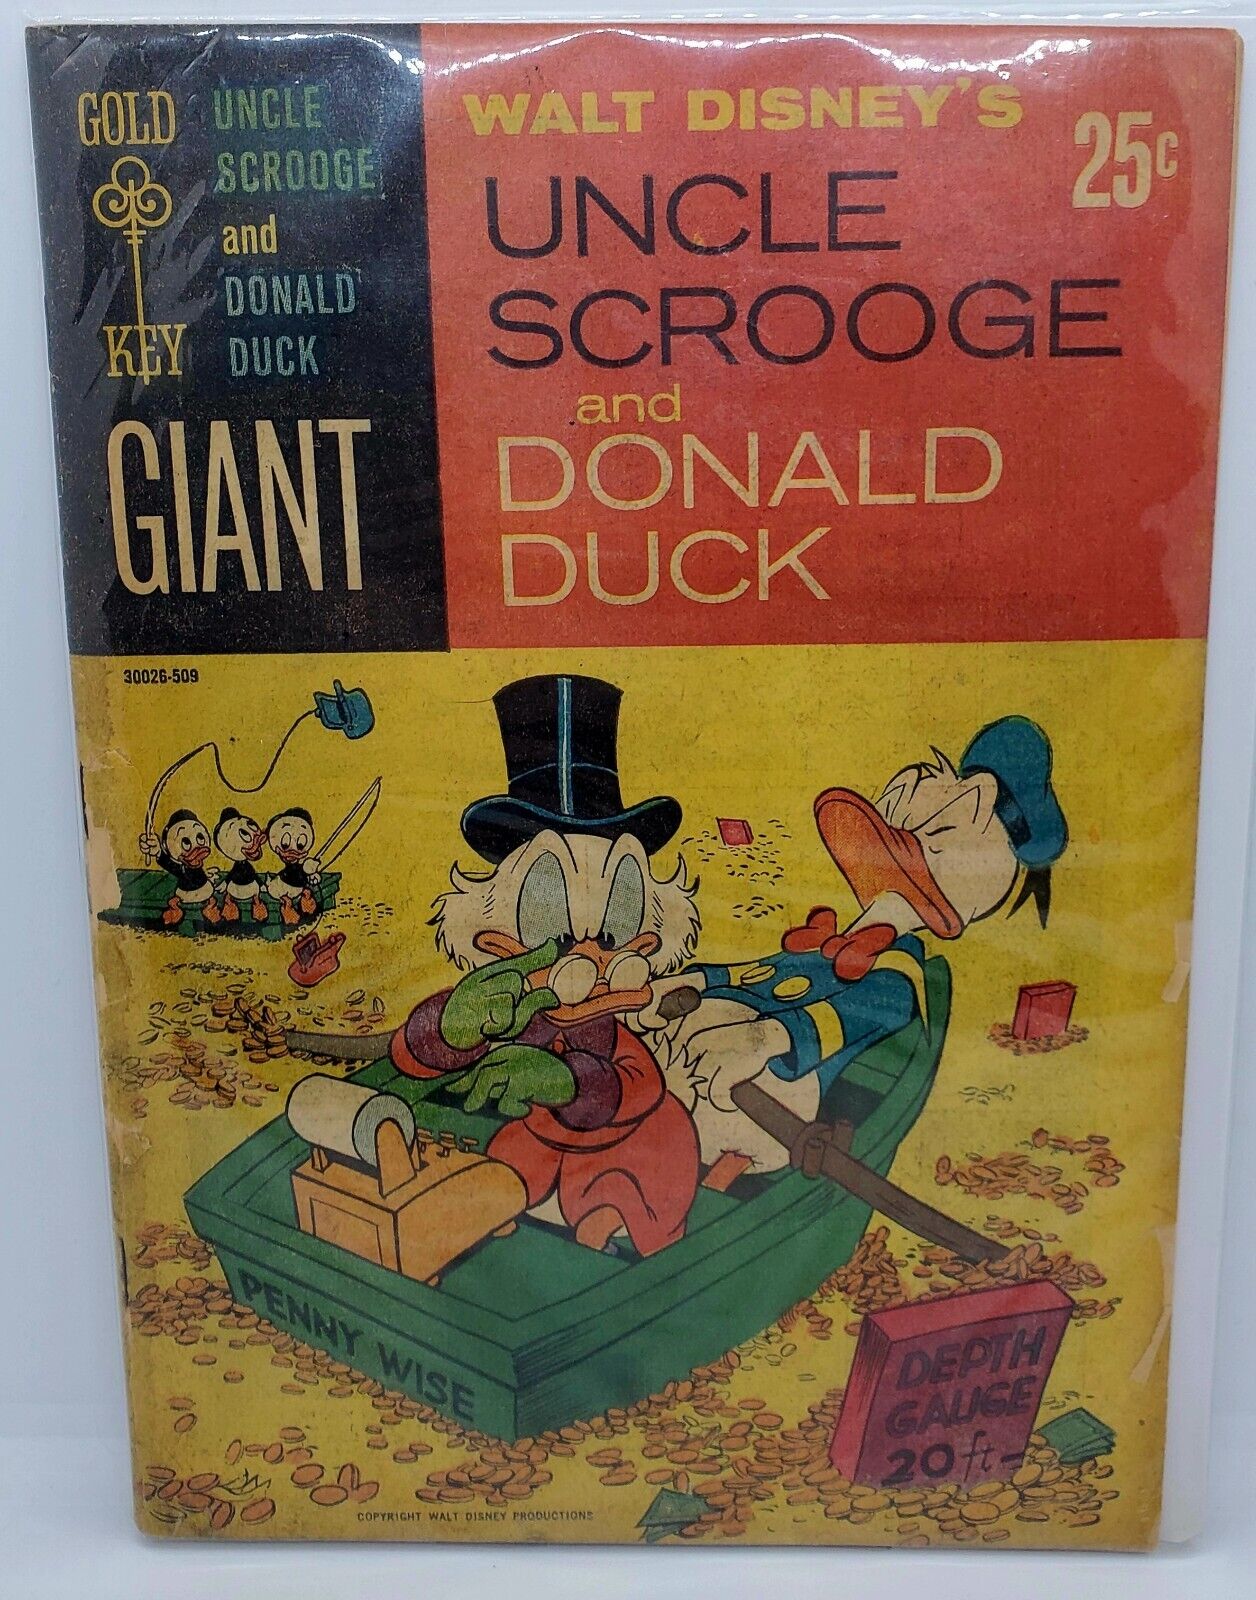 Vintage Uncle Scrooge and Donald Duck #1 Gold Key Giant Comic 1965 🔥